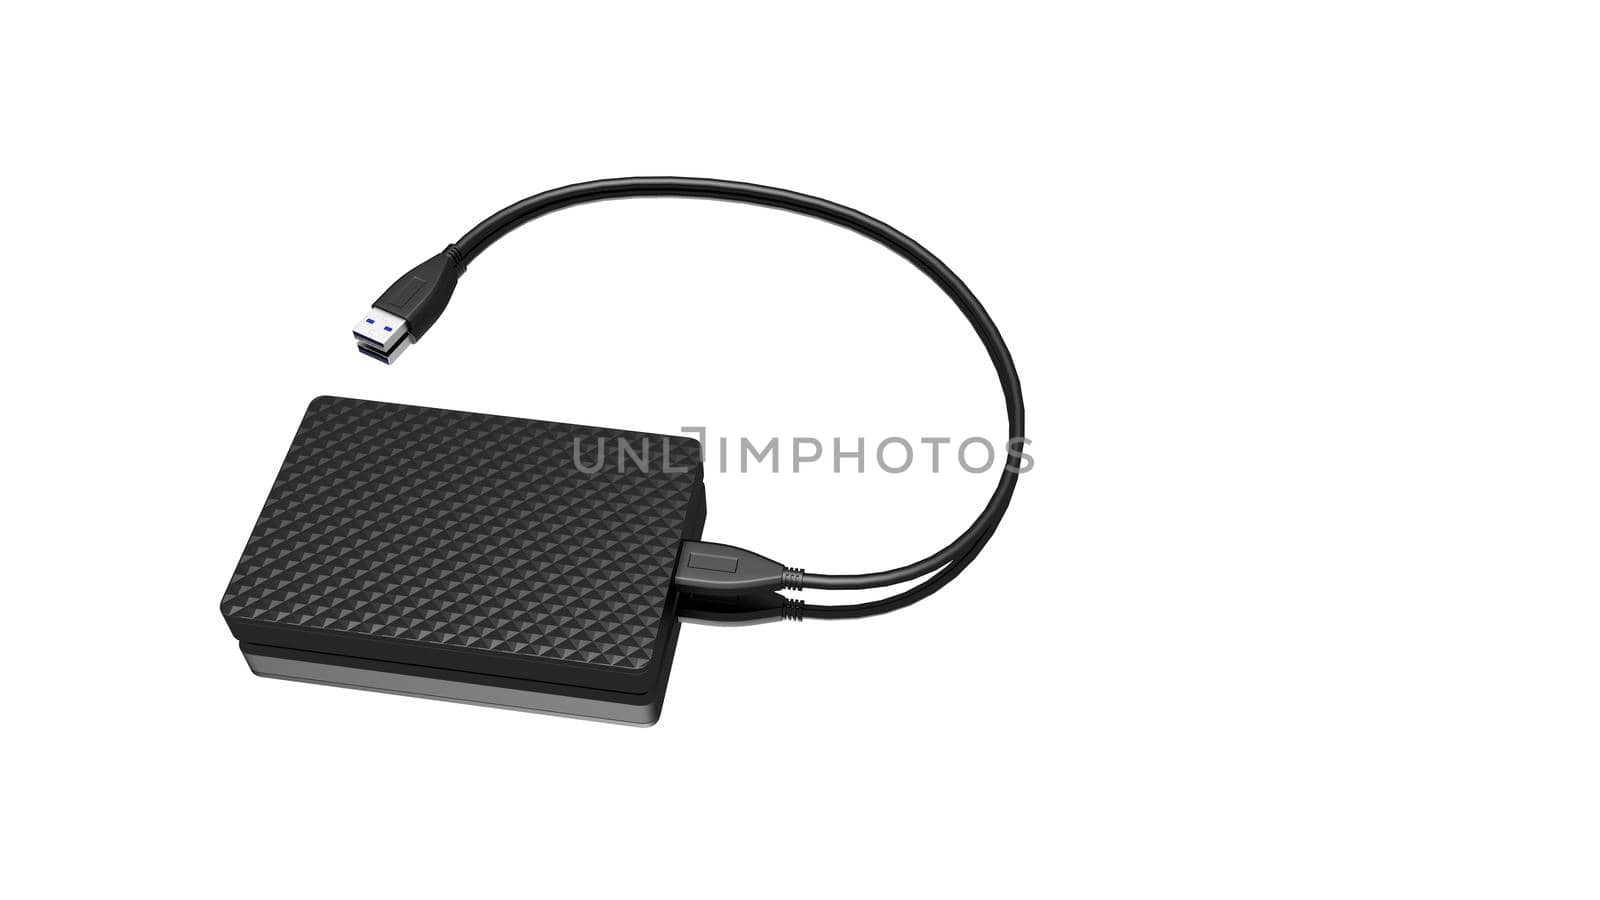 Portable external hard disk drive with USB cable on white background. by Photochowk